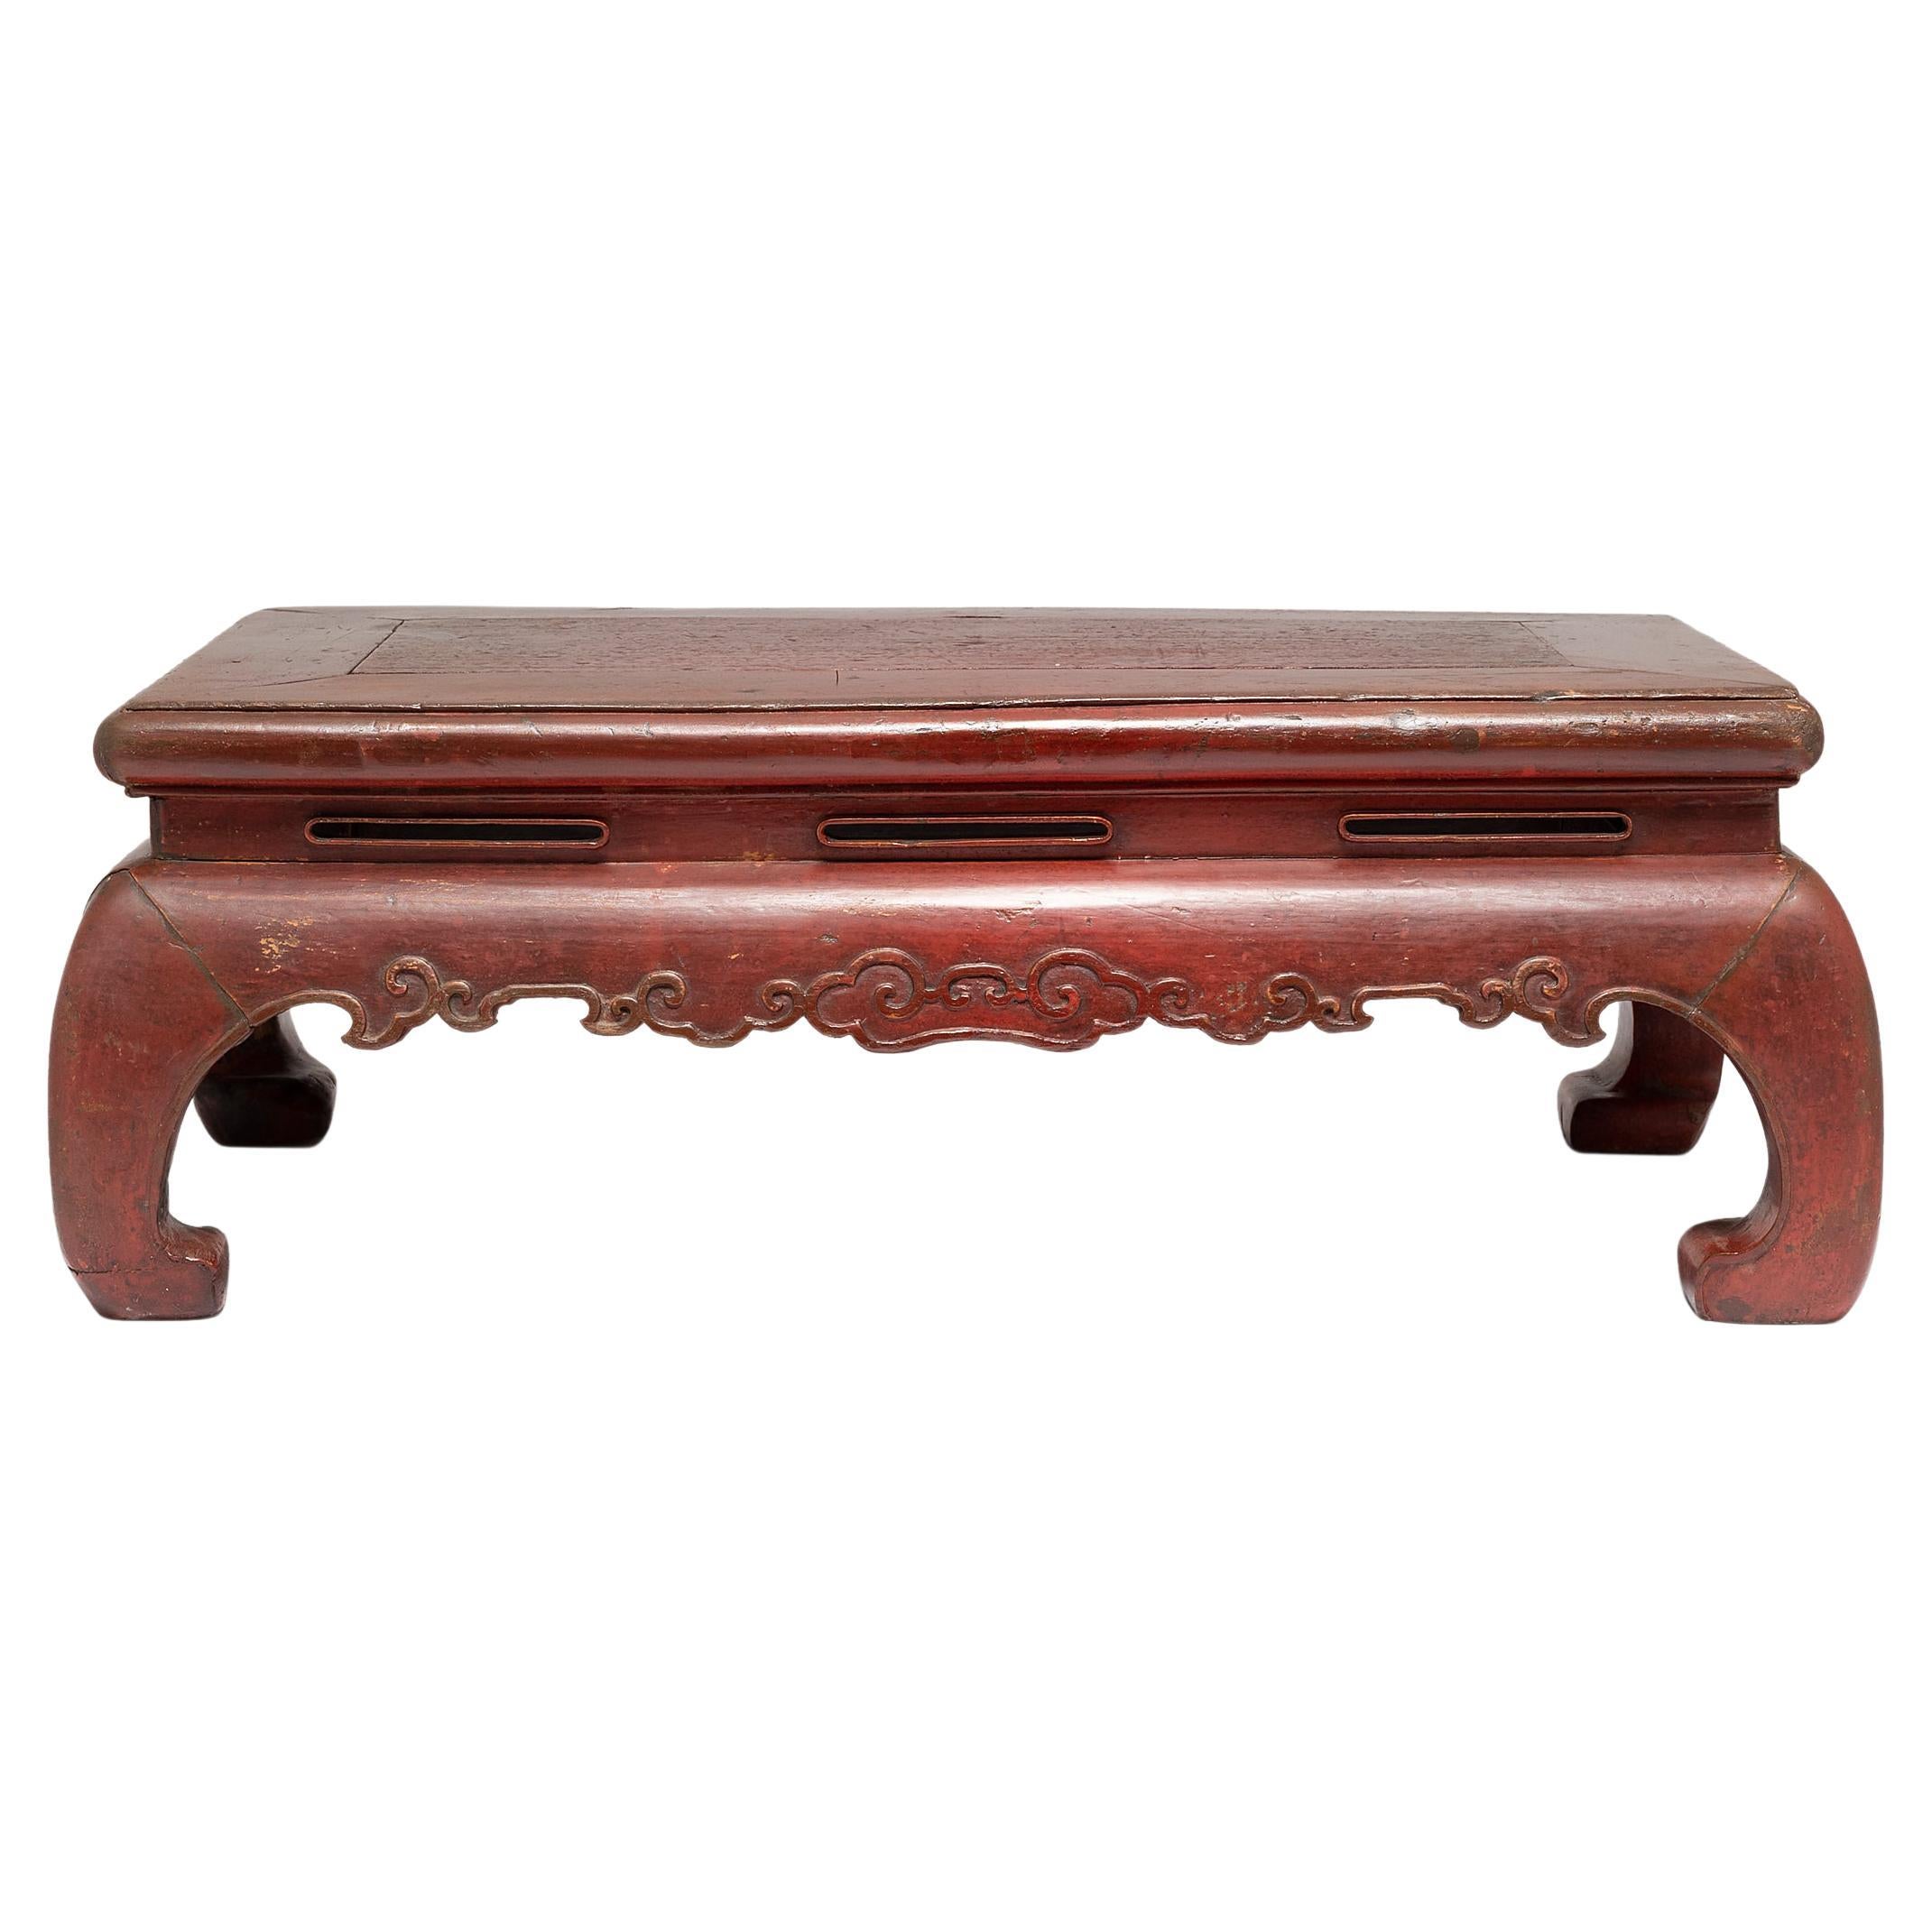 Chinese Red Lacquer Kang Table, c. 1900